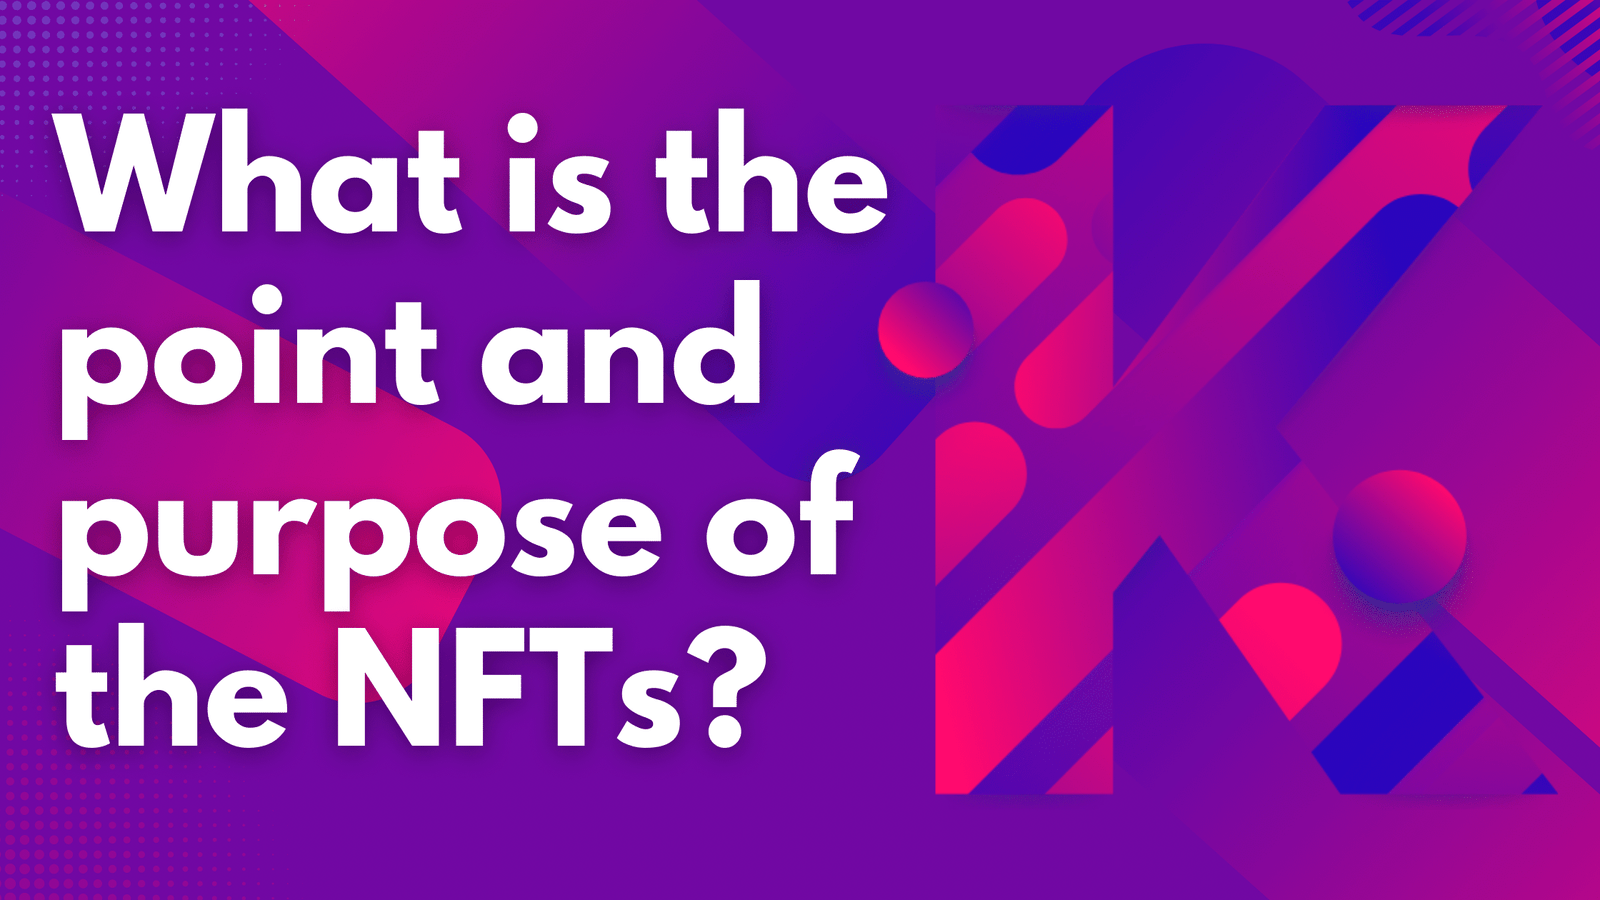 What is the point and purpose of the NFTs